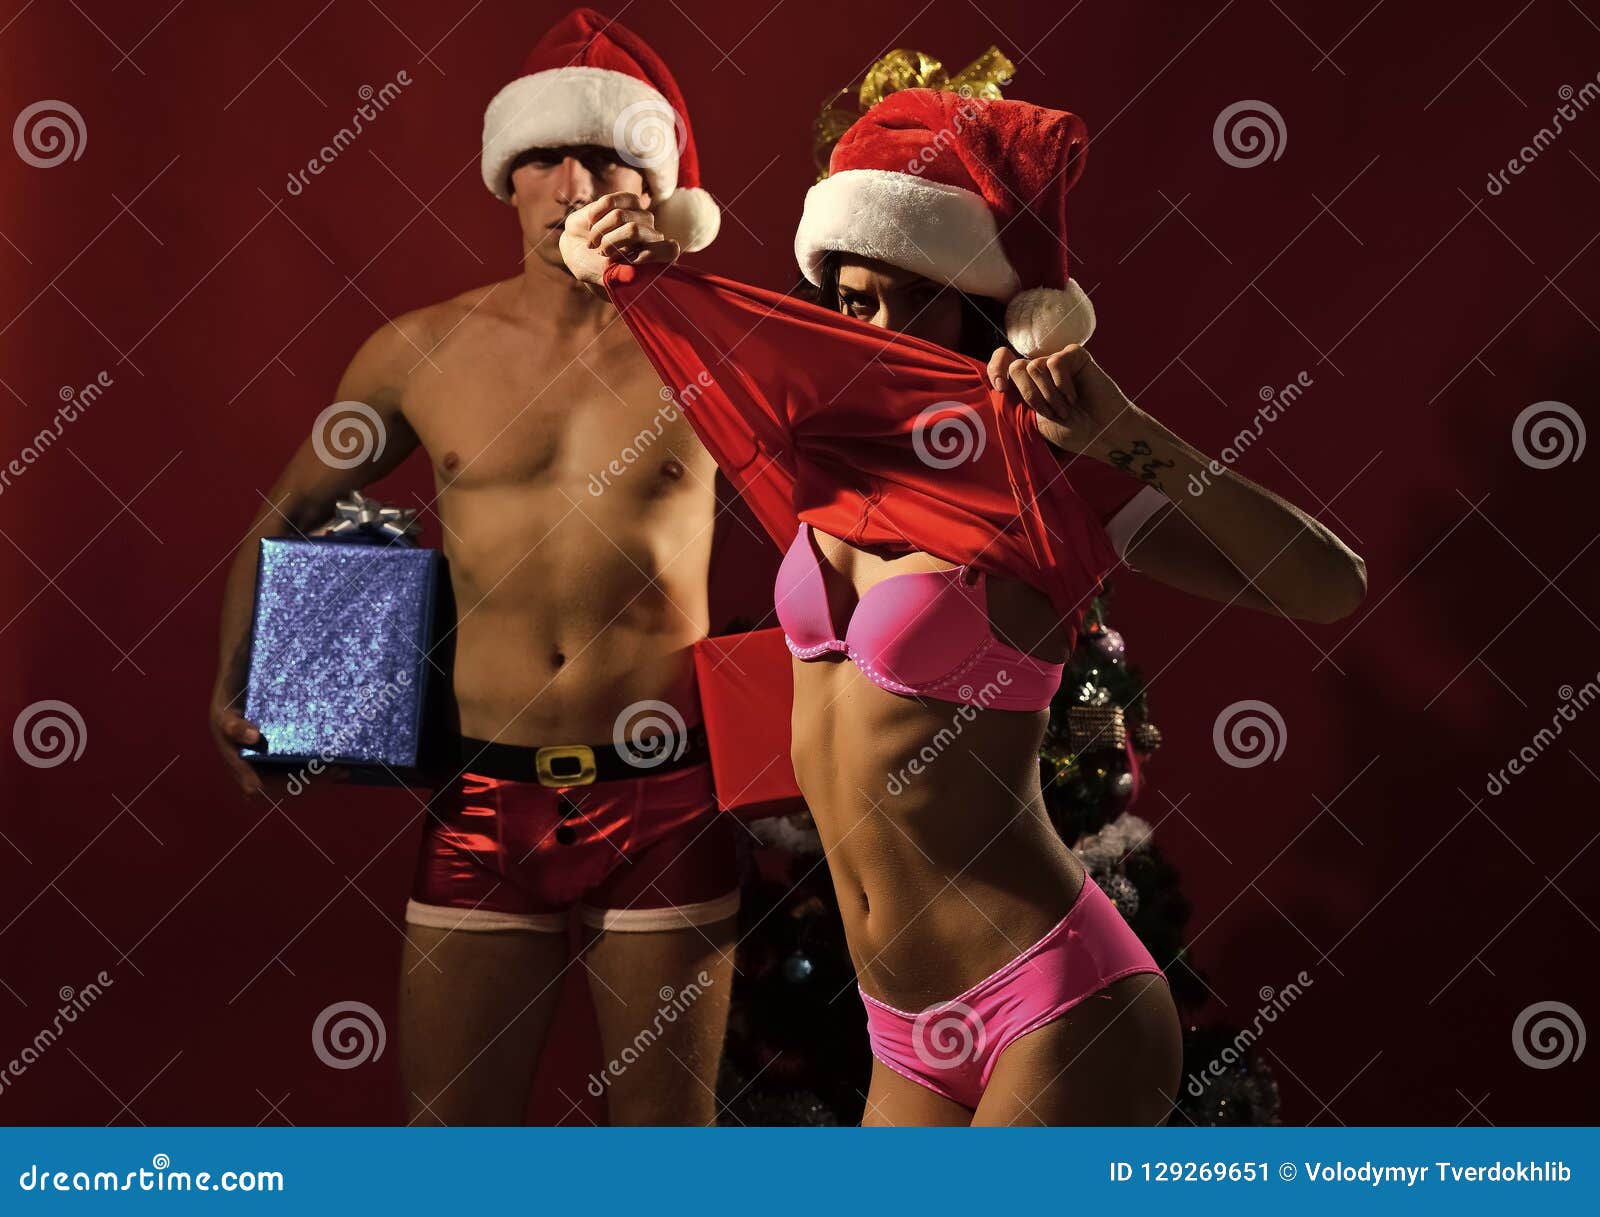 Sex To Girls One Boy Christmas - 842 Sex Xmas Stock Photos - Free & Royalty-Free Stock Photos from Dreamstime